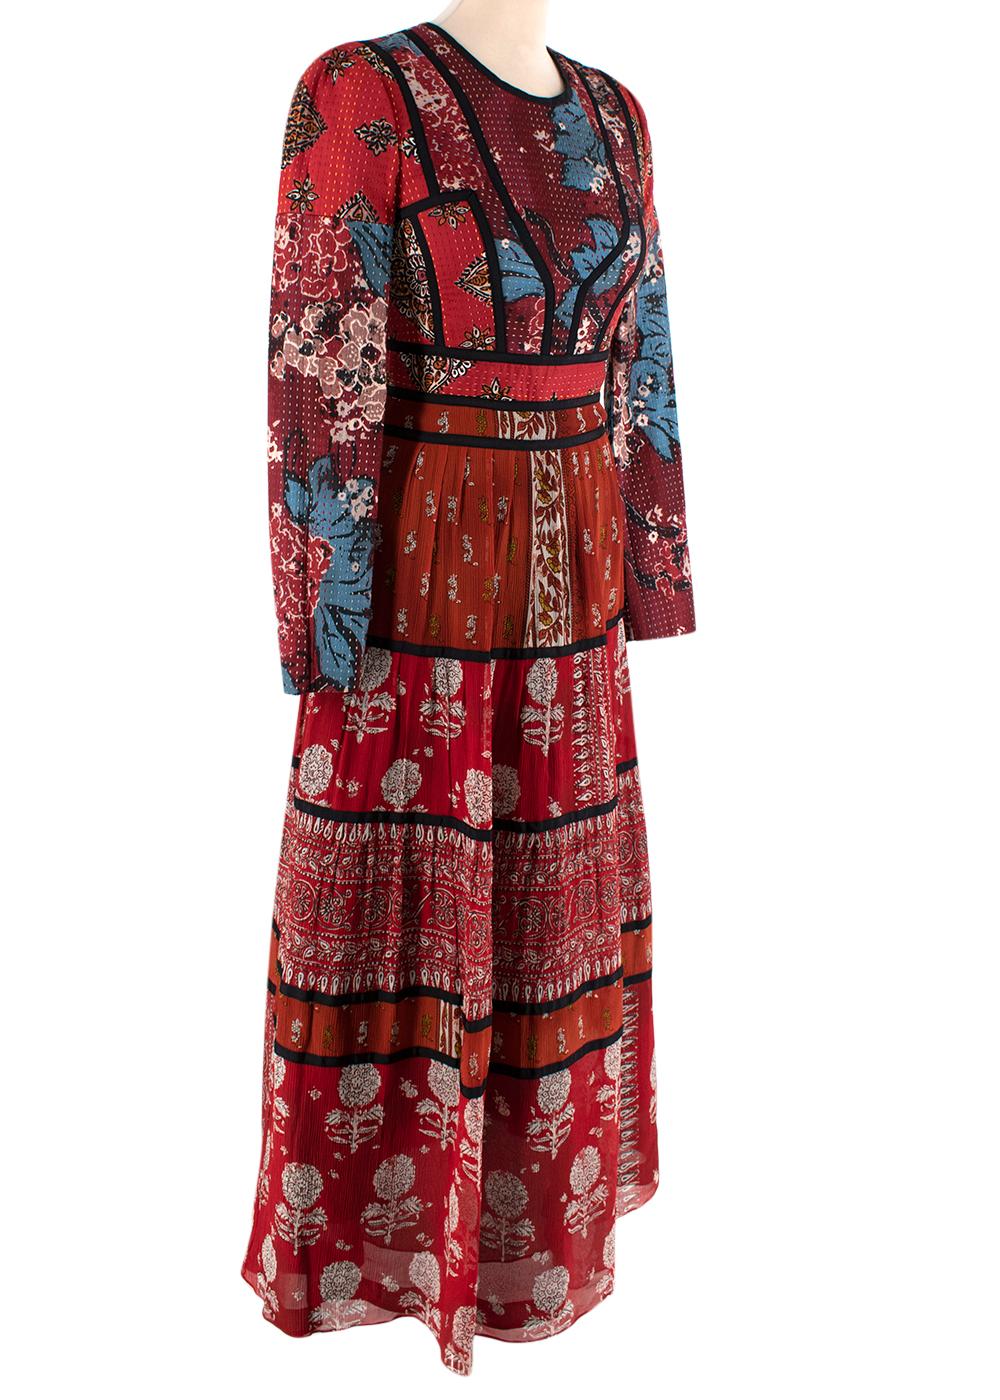 Burberry Prorsum Patchwork Red Silk Peasant Dress

- Beautiful peasant-syle dress by Burberry Prorsum iwth a 60's inspired overtone
- Crafted from silk crepon in red hues with a ditzy floral patchwork
- Scoop neck, long sleeve
- Structuted bodice,